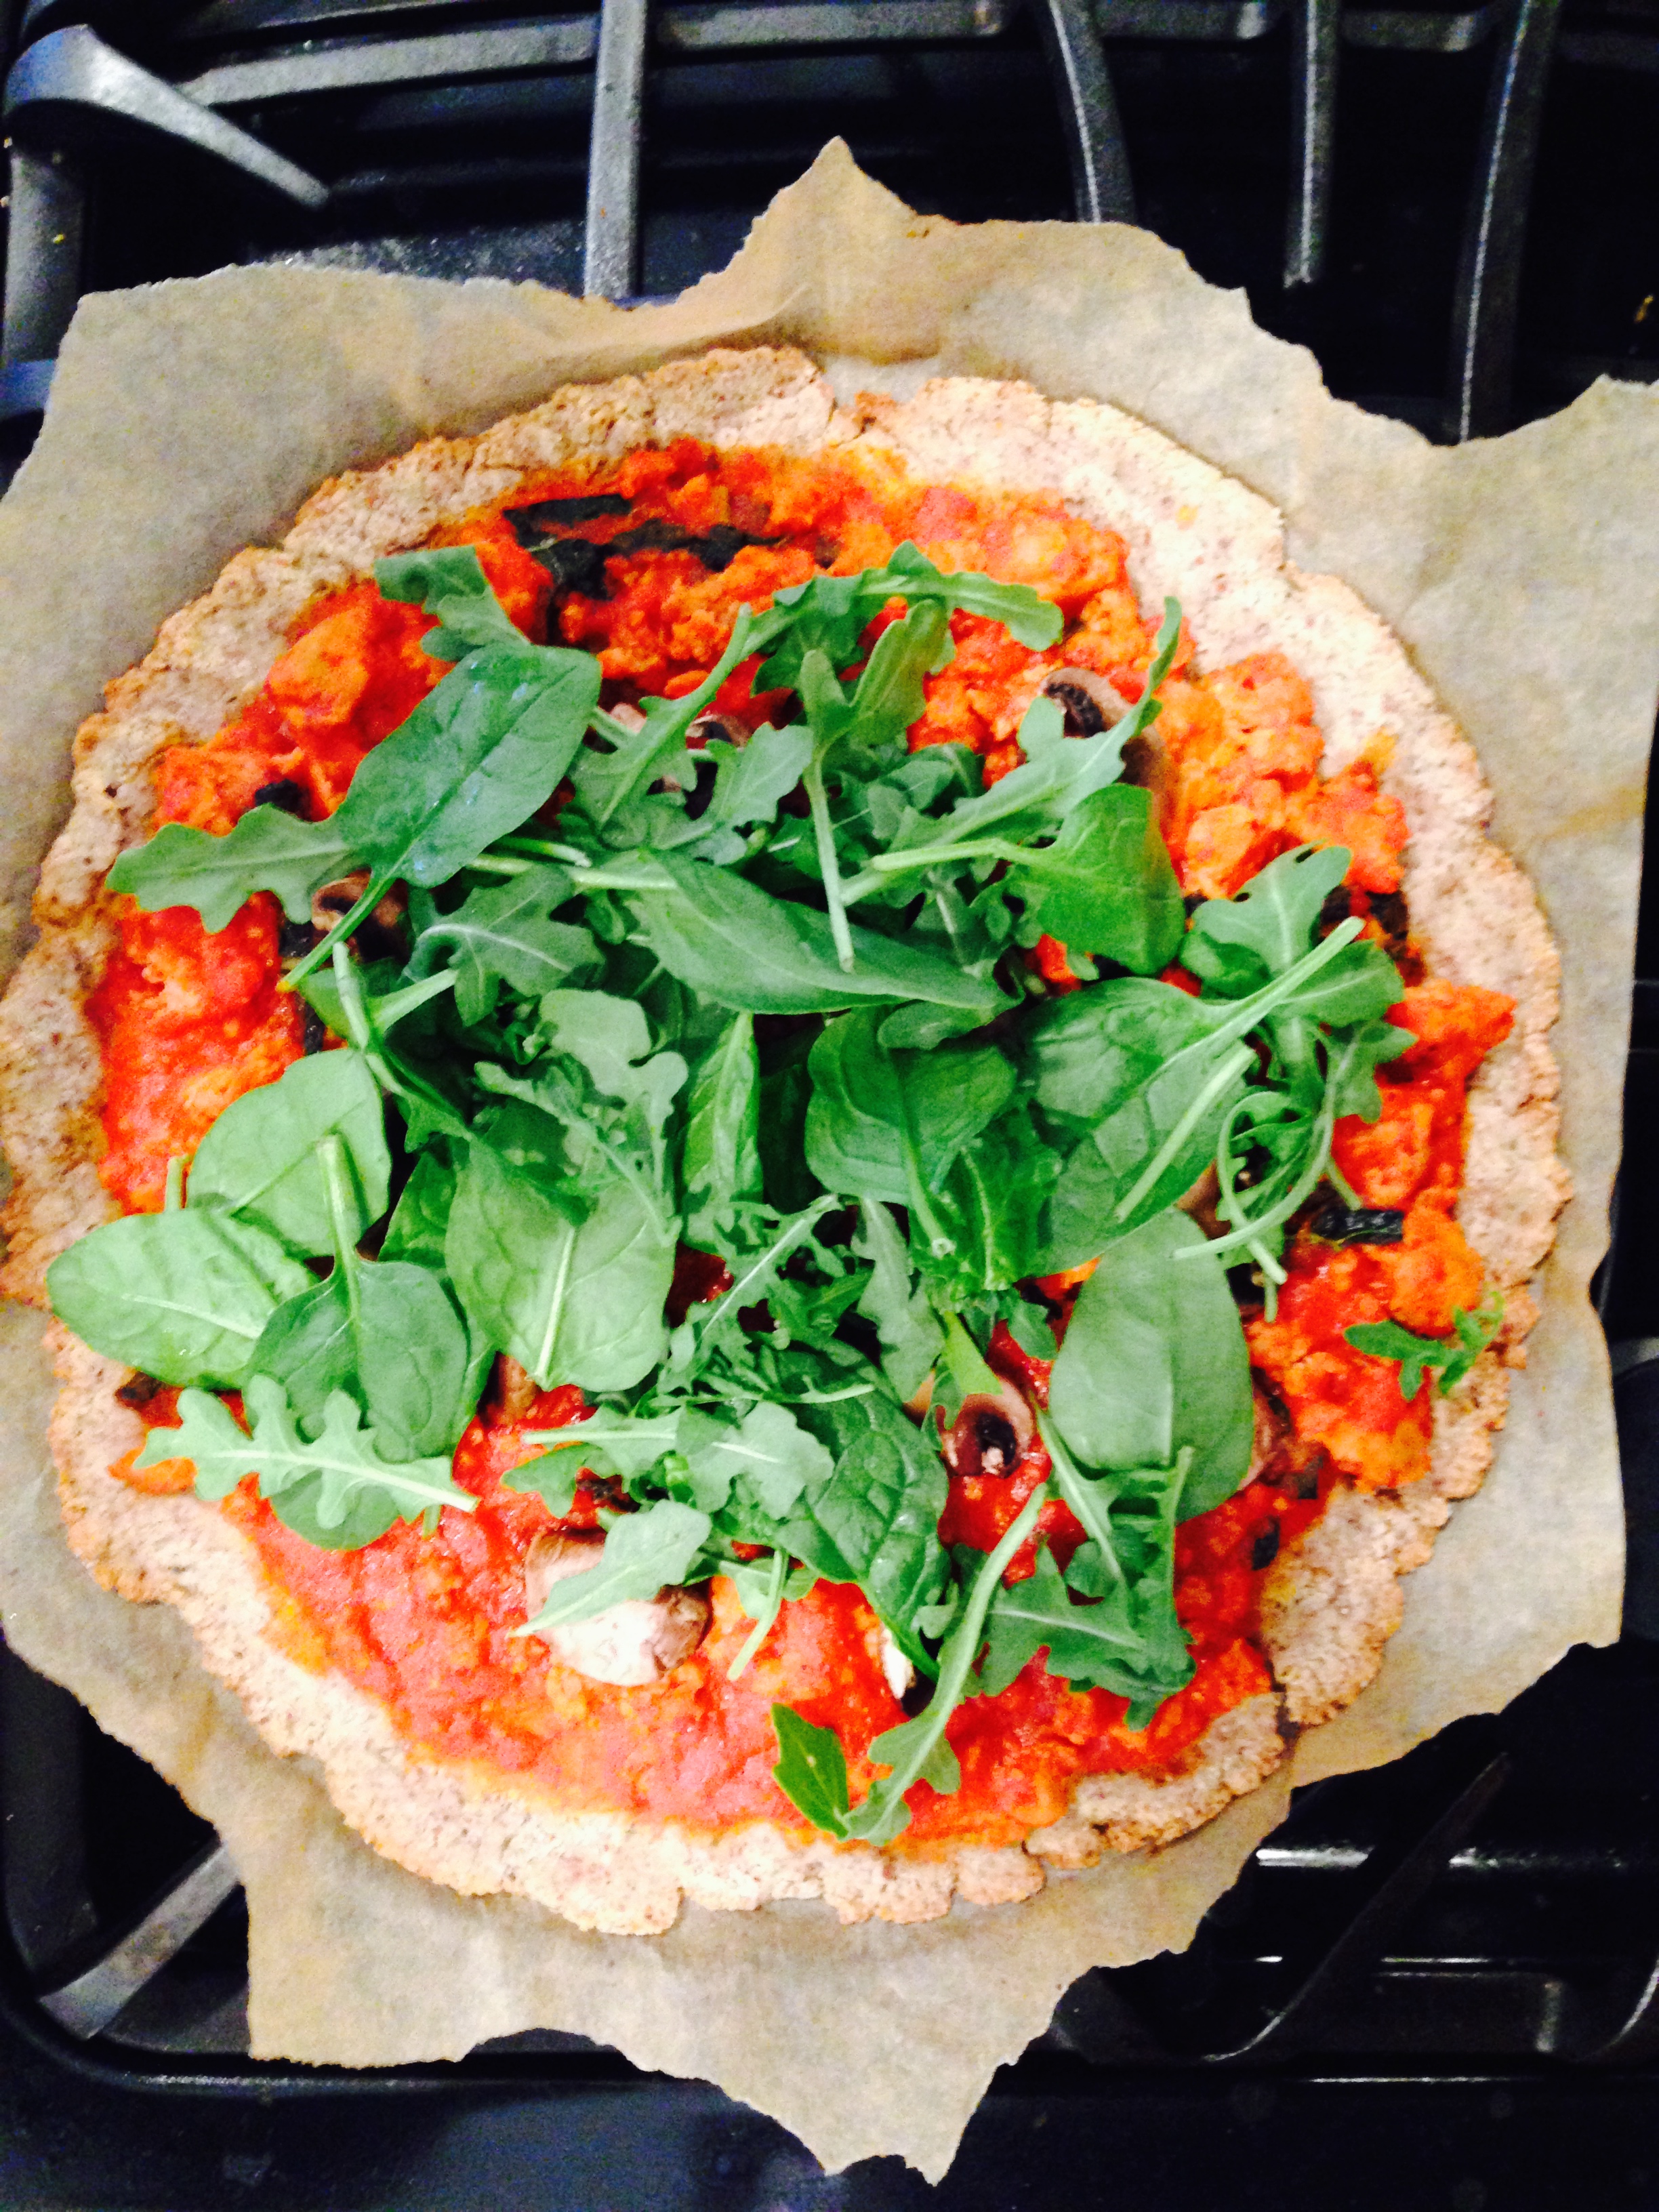 Inspiring Health through Beautiful and Delicious Pizza